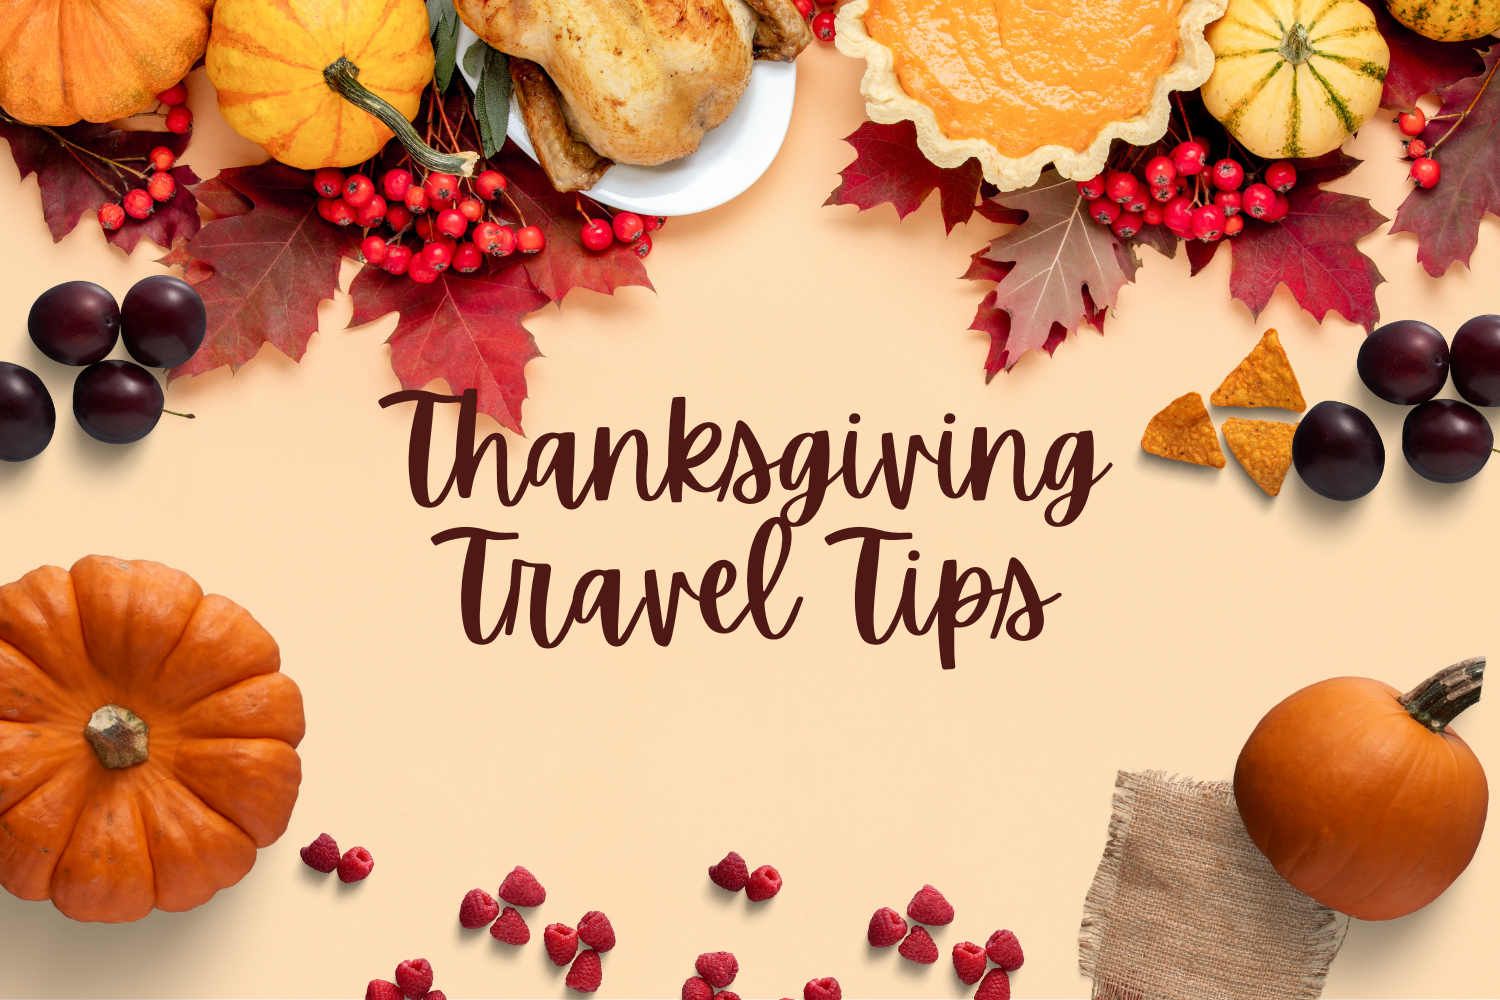 Travel Tips to help you have a fantastic Thanksgiving! 

